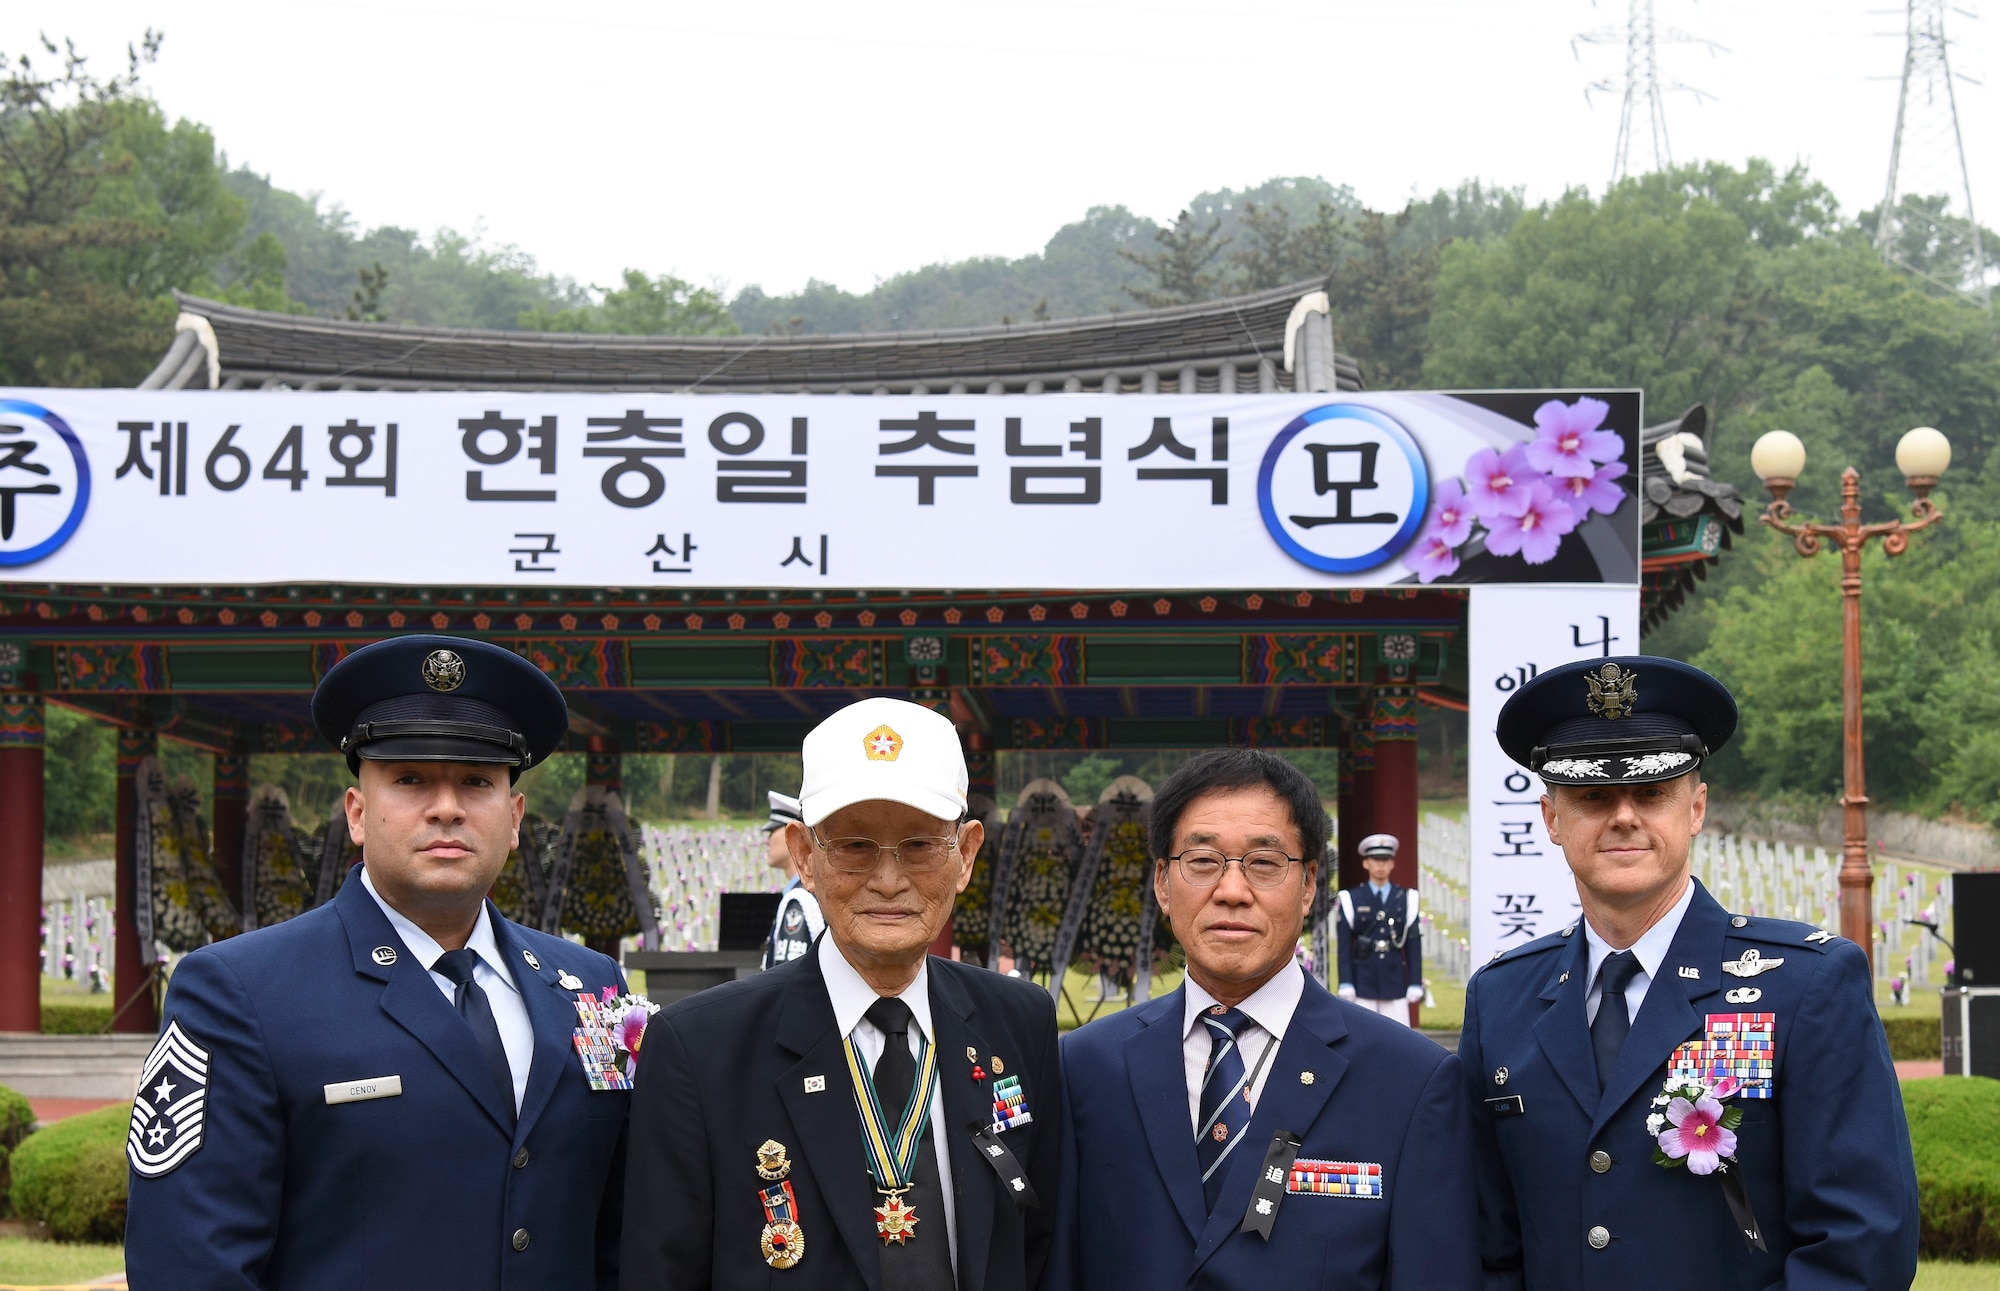 Korean Memorial Day is a national holiday dedicated to commemorating the lives of both men and women who died while in military service or during the independence movement.